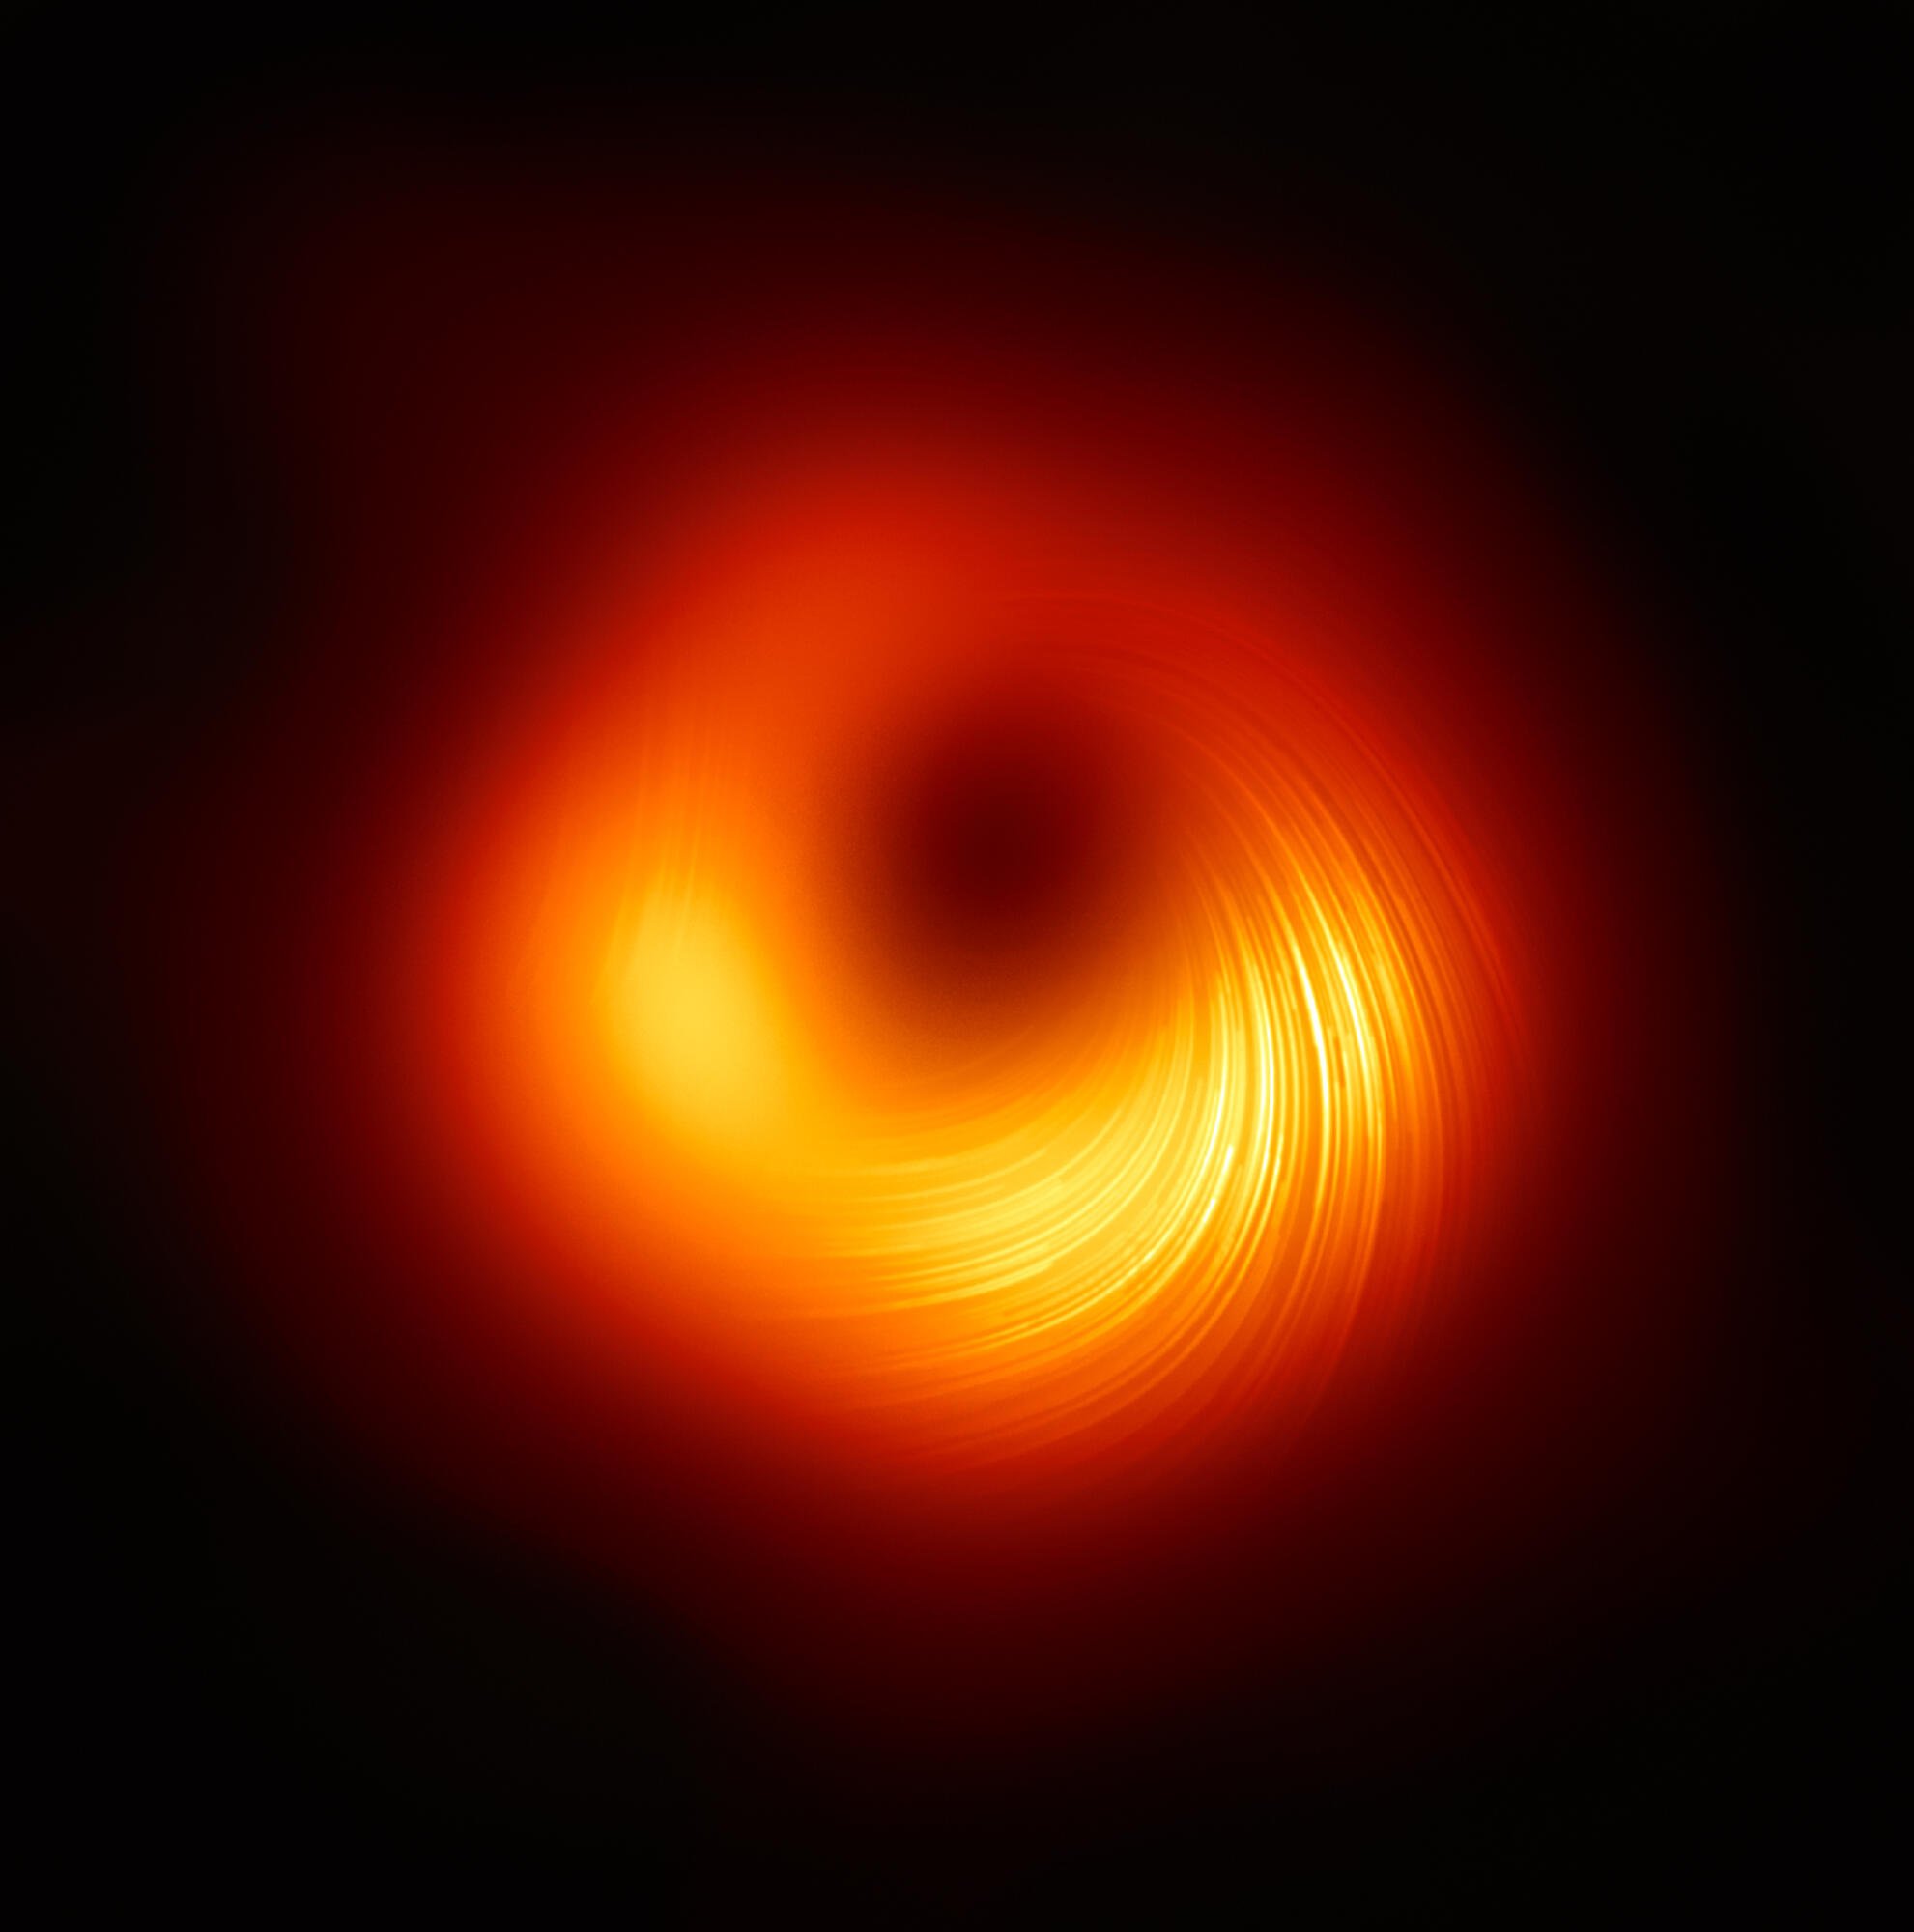 Astronomers Have Captured the Most Detailed Photo of a Black Hole Ever—See the Magnetic Fields